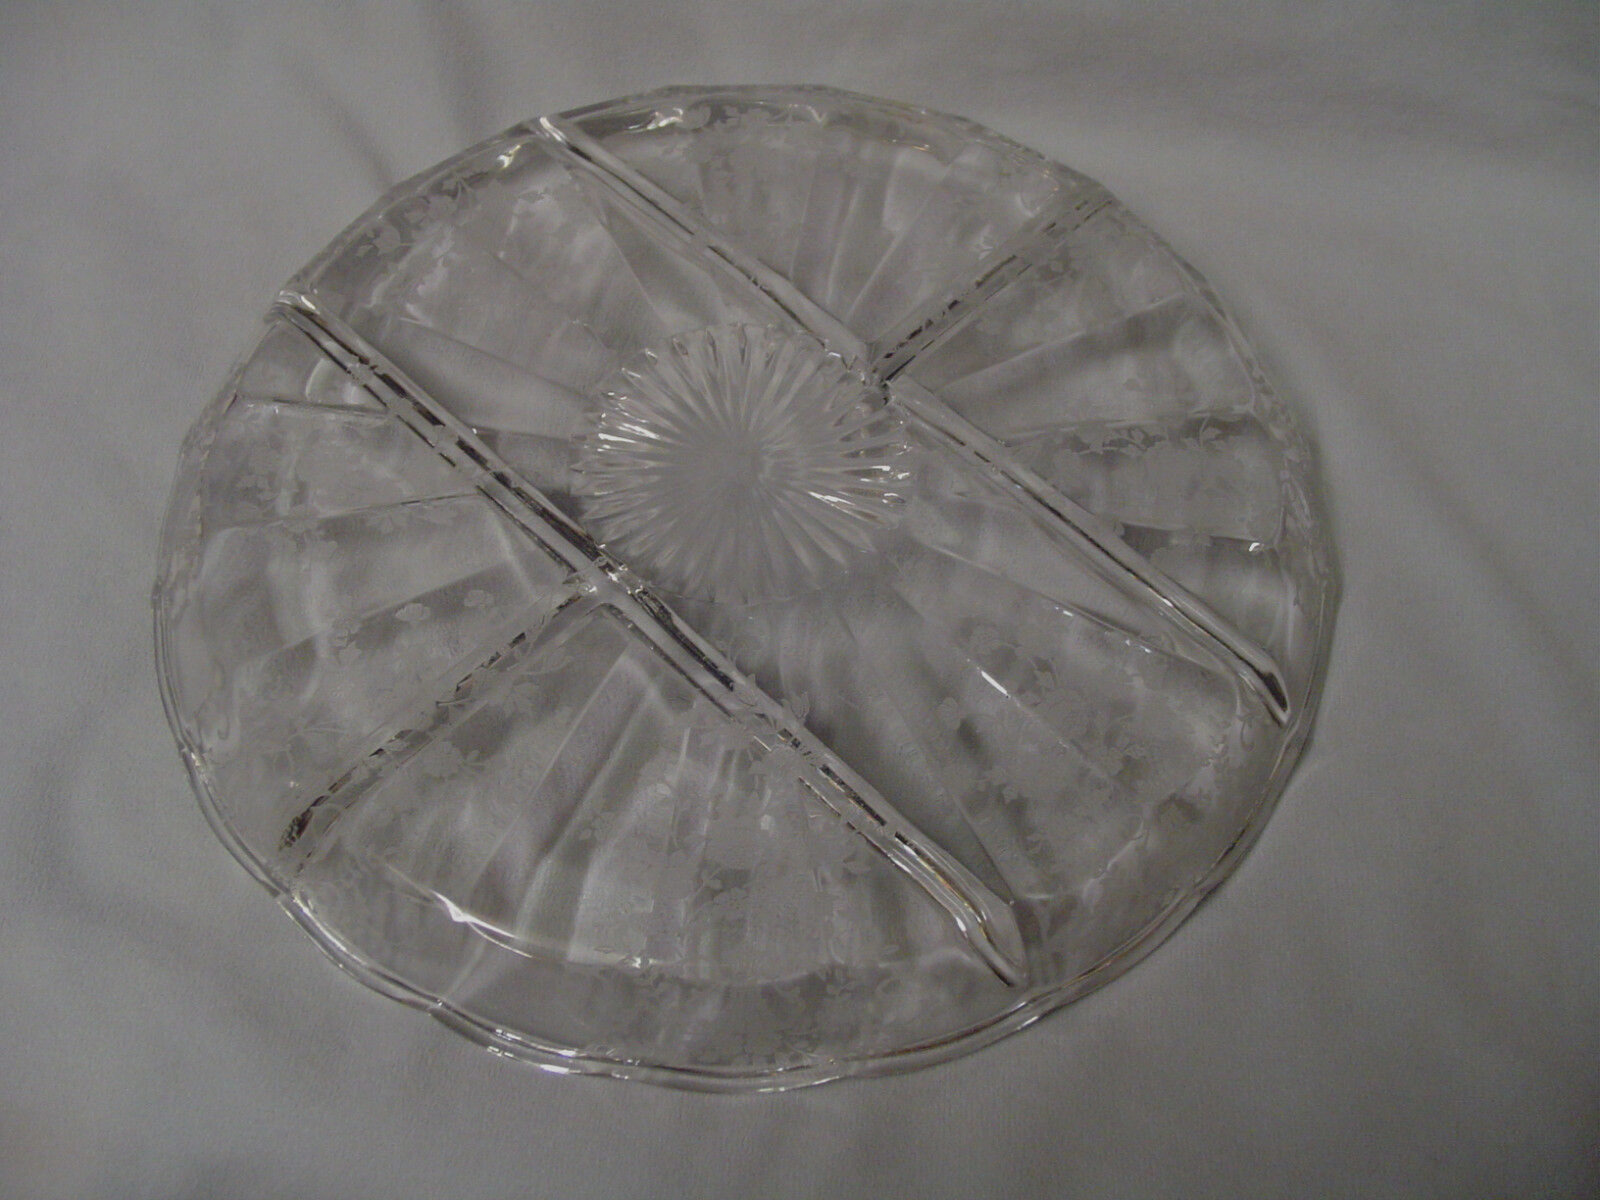 Portia By Cambridge Scalloped 5 Part Relish Clear 10.5" Across 1" Tall Vintage